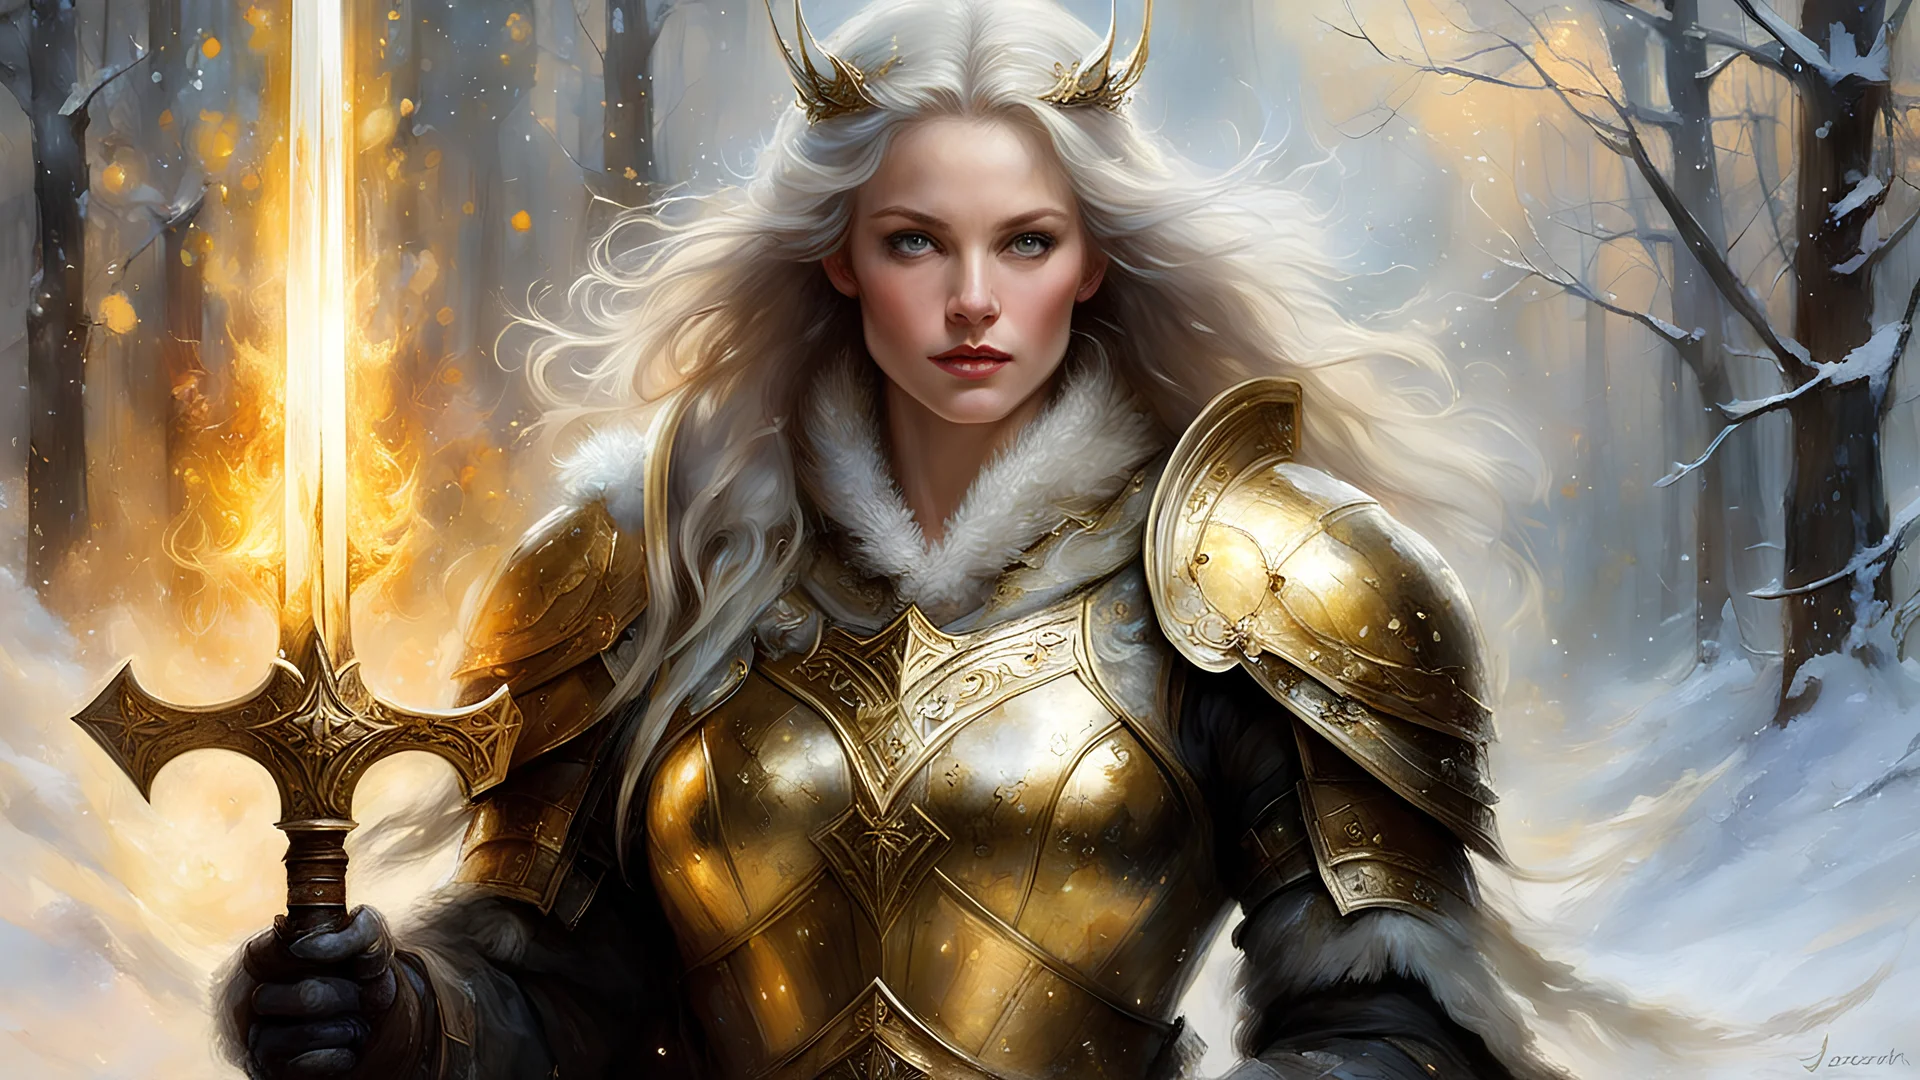 winter, (1woman, russian), beautiful, wicked, (warrior queen), soft impressionist brushstrokes, richard schmid style canvas texture, magical glow, (gold armor), with glowing spells, magical lighting, by Jean-Baptiste Monge: 20 Artgerm:5 and Greg Rutkowski:30, by richard schmid :10, Painting by richard schmid